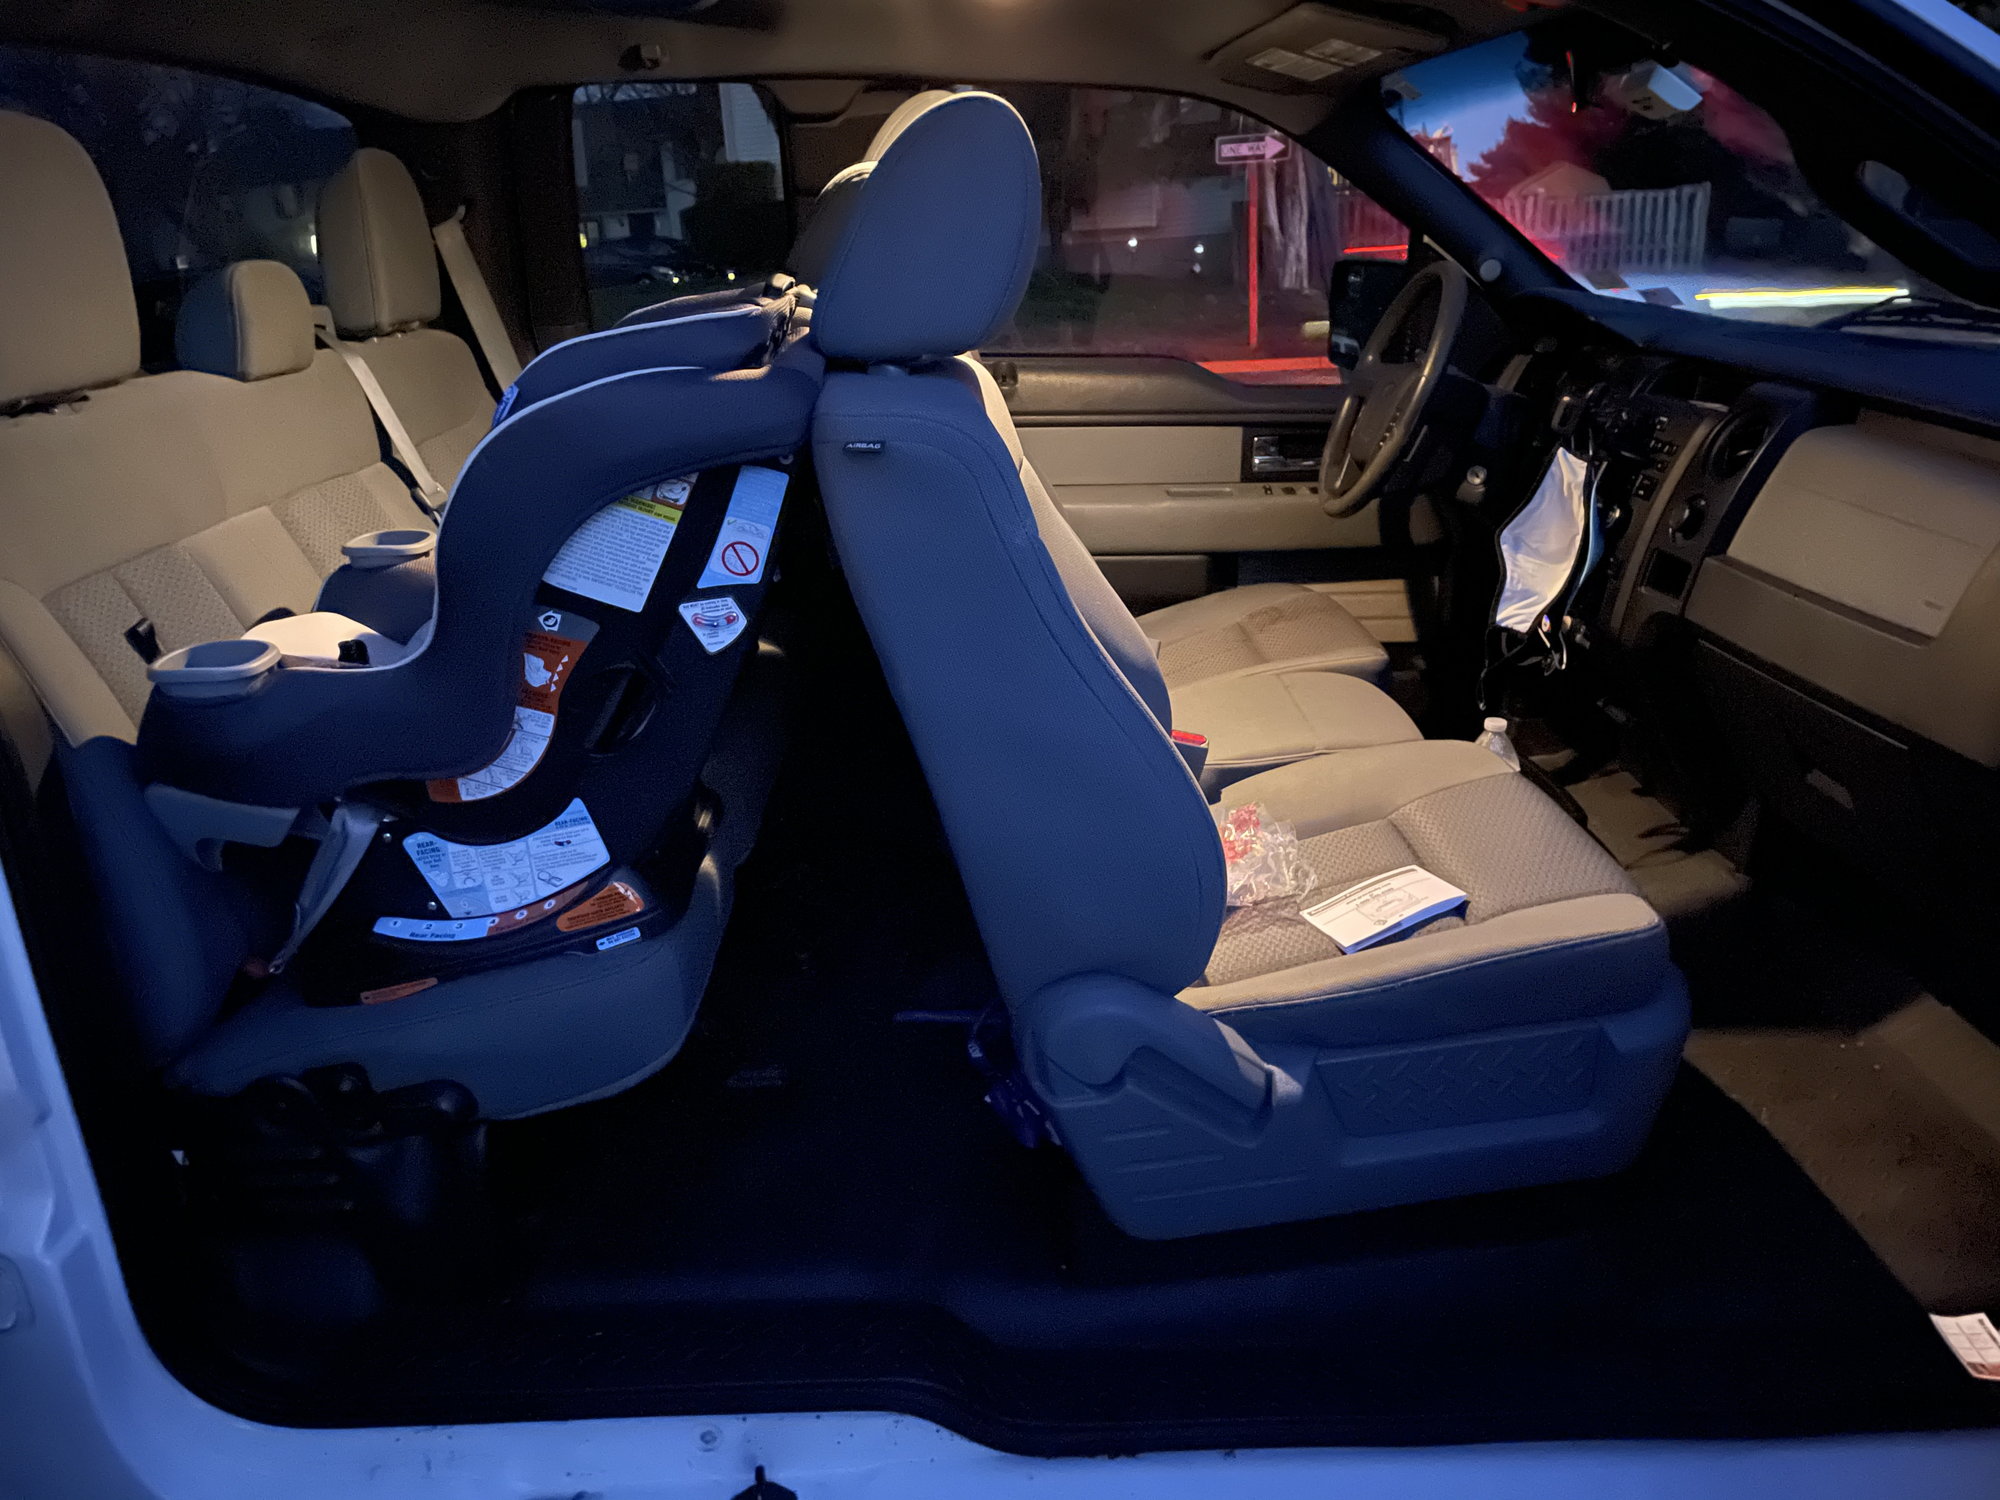 Car Seat In An Extended Cab Ford, Can A Rear Facing Car Seat Fit In An Extended Cab Truck